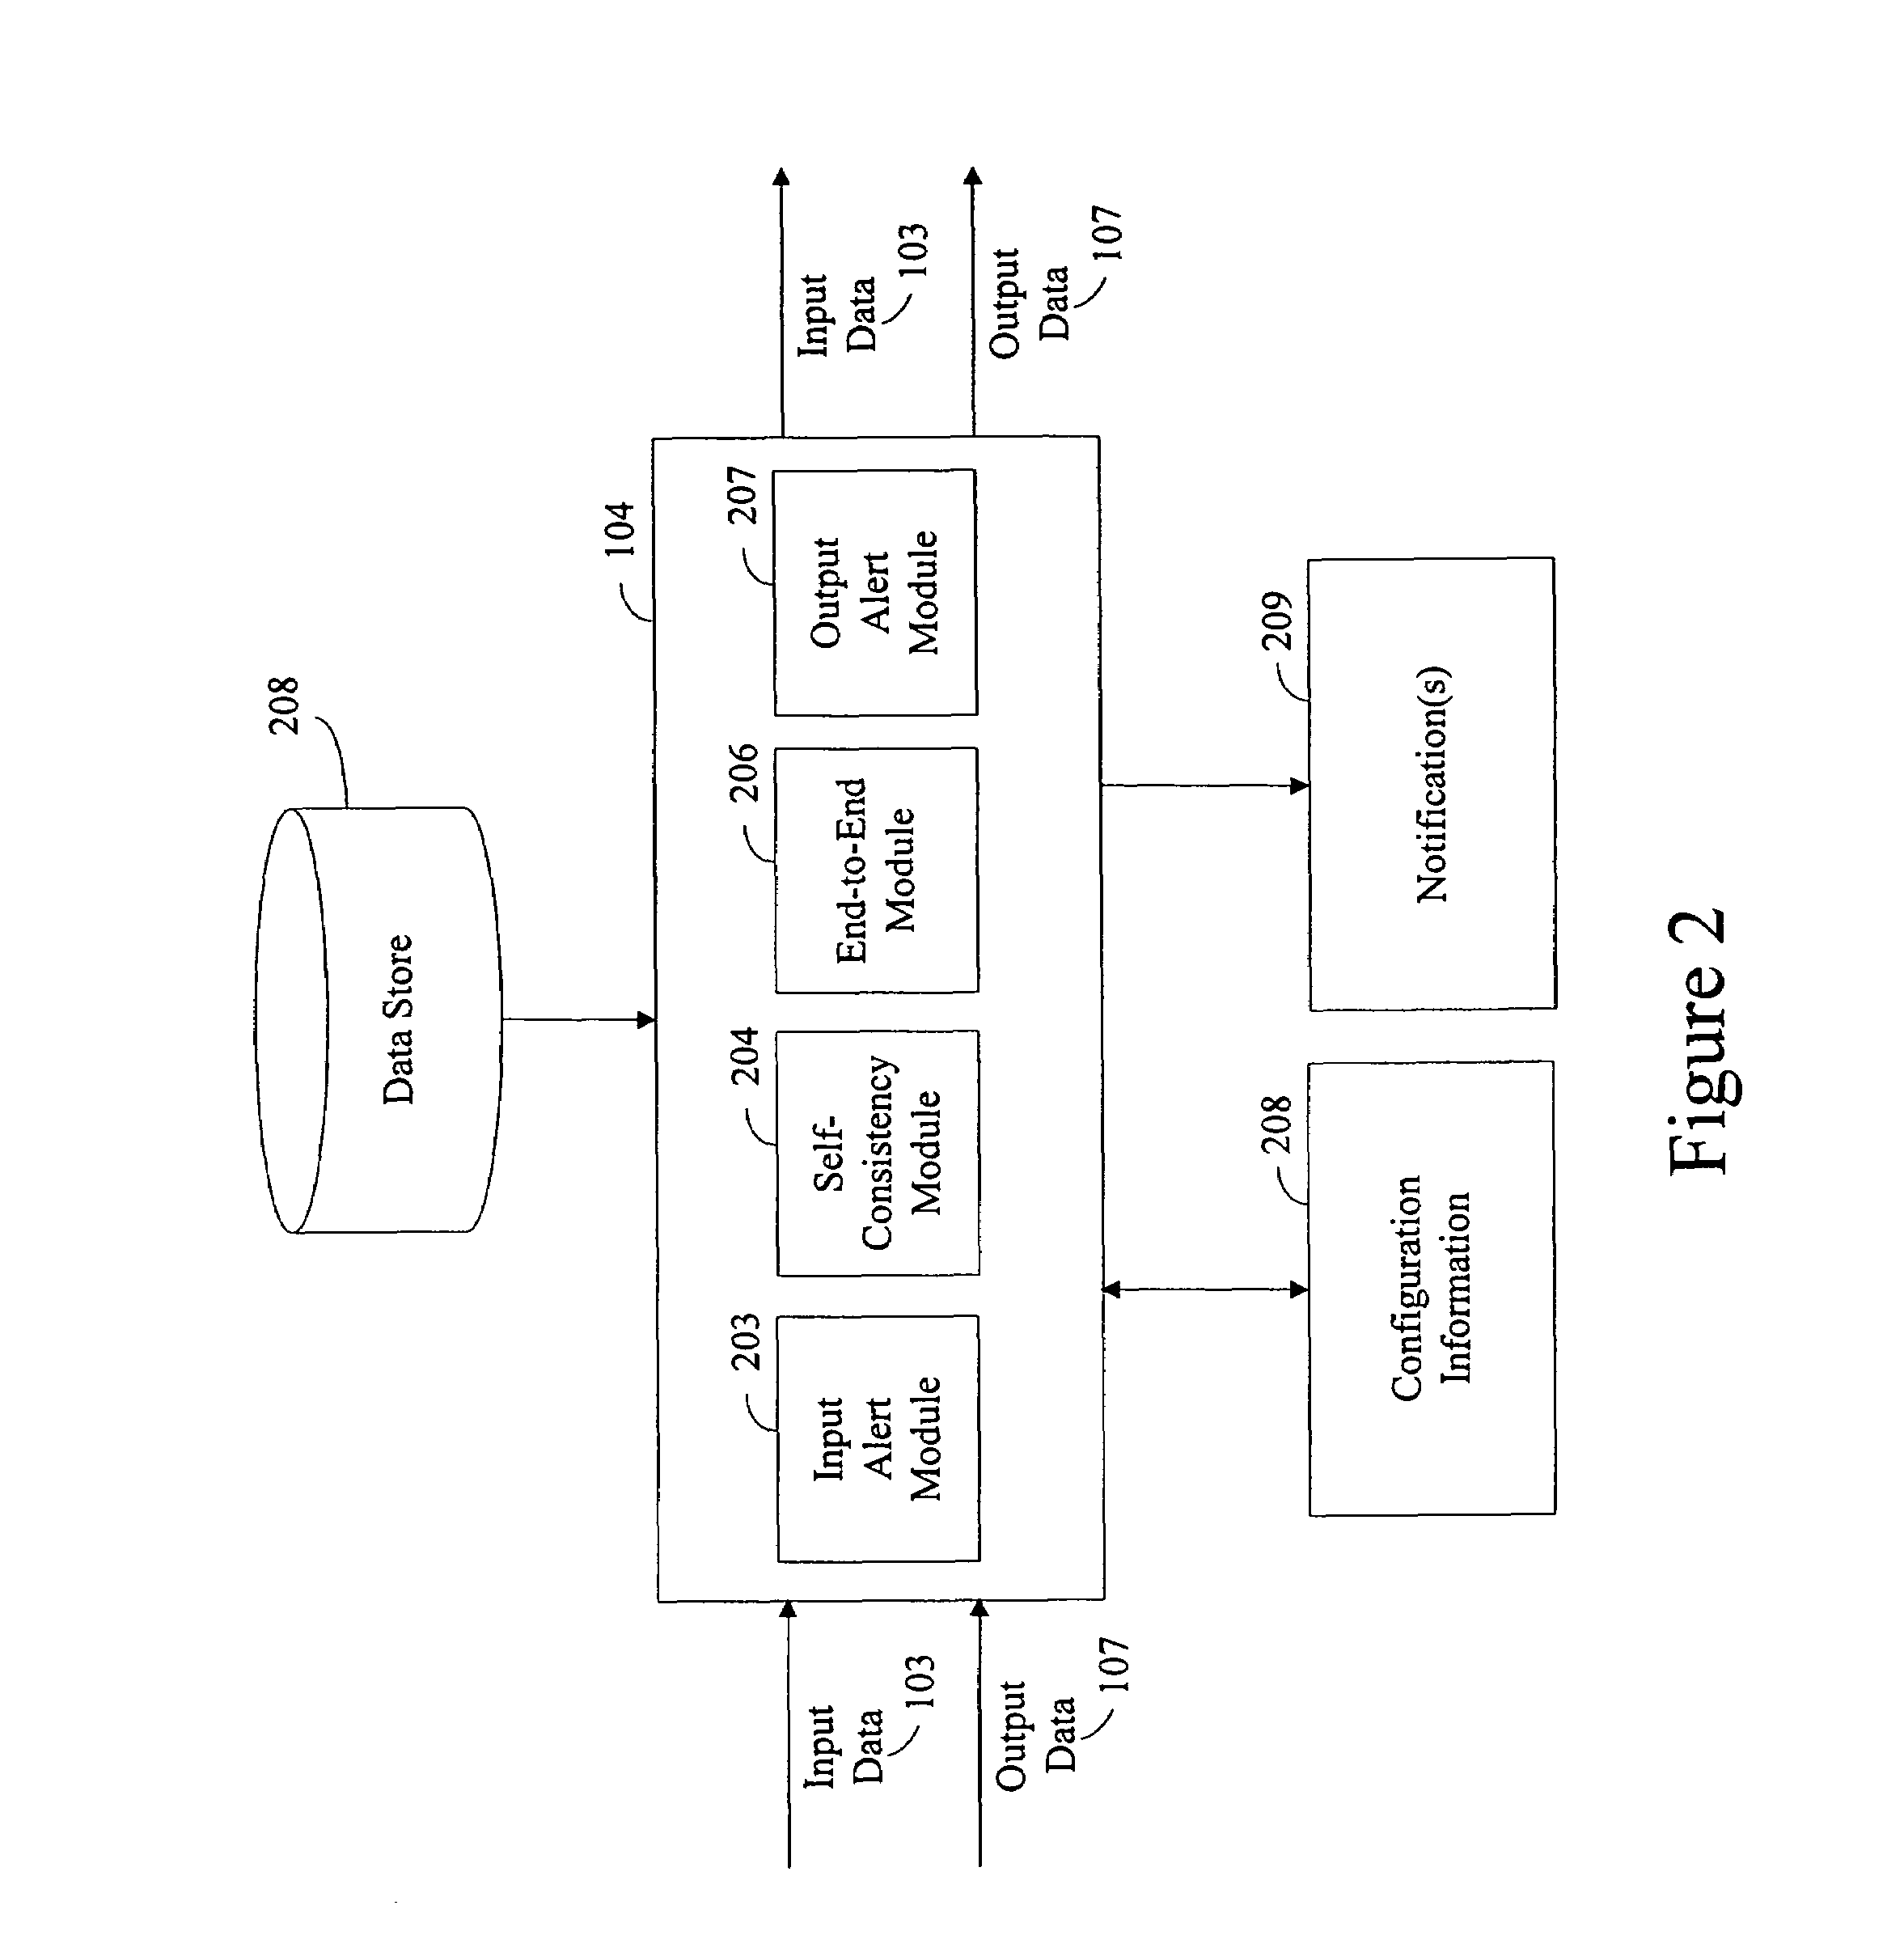 Method and system of measuring data quality